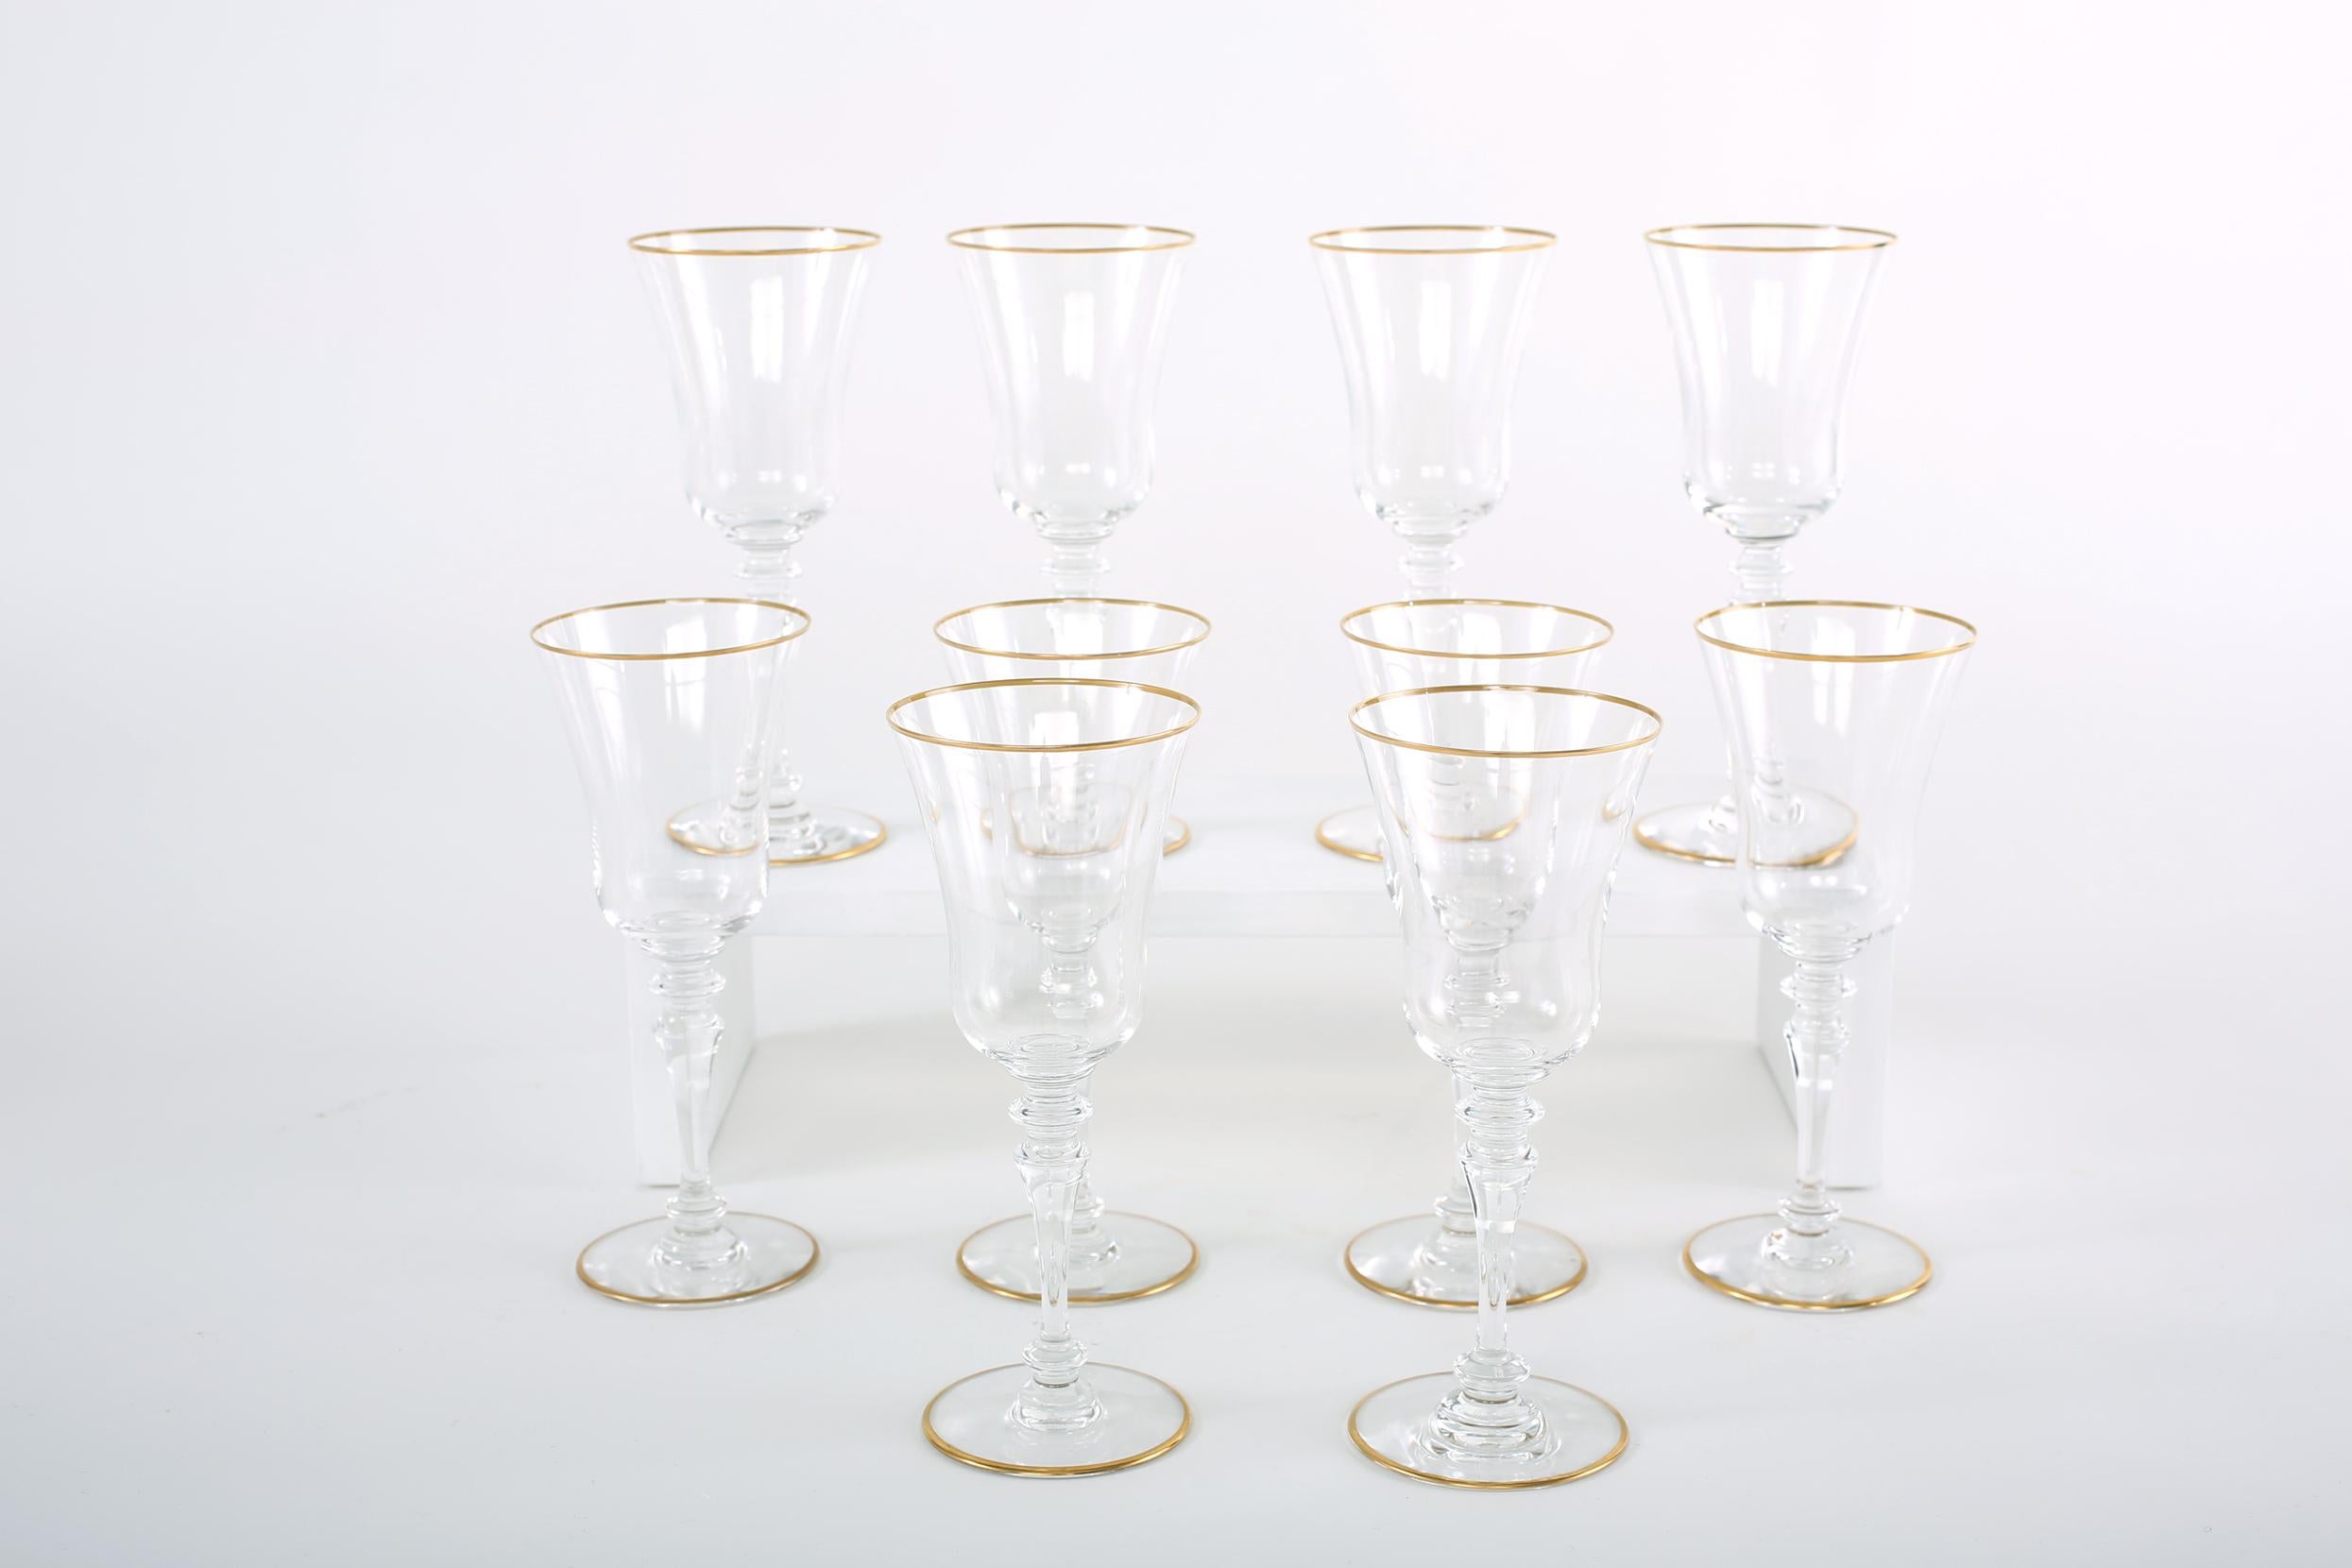 Mid 20th century Baccarat crystal barware / tableware service for ten people. Each glass is in great vintage condition. Maker's mark undersigned. Each one stand about 8 inches tall x 3.3 inches diameter.